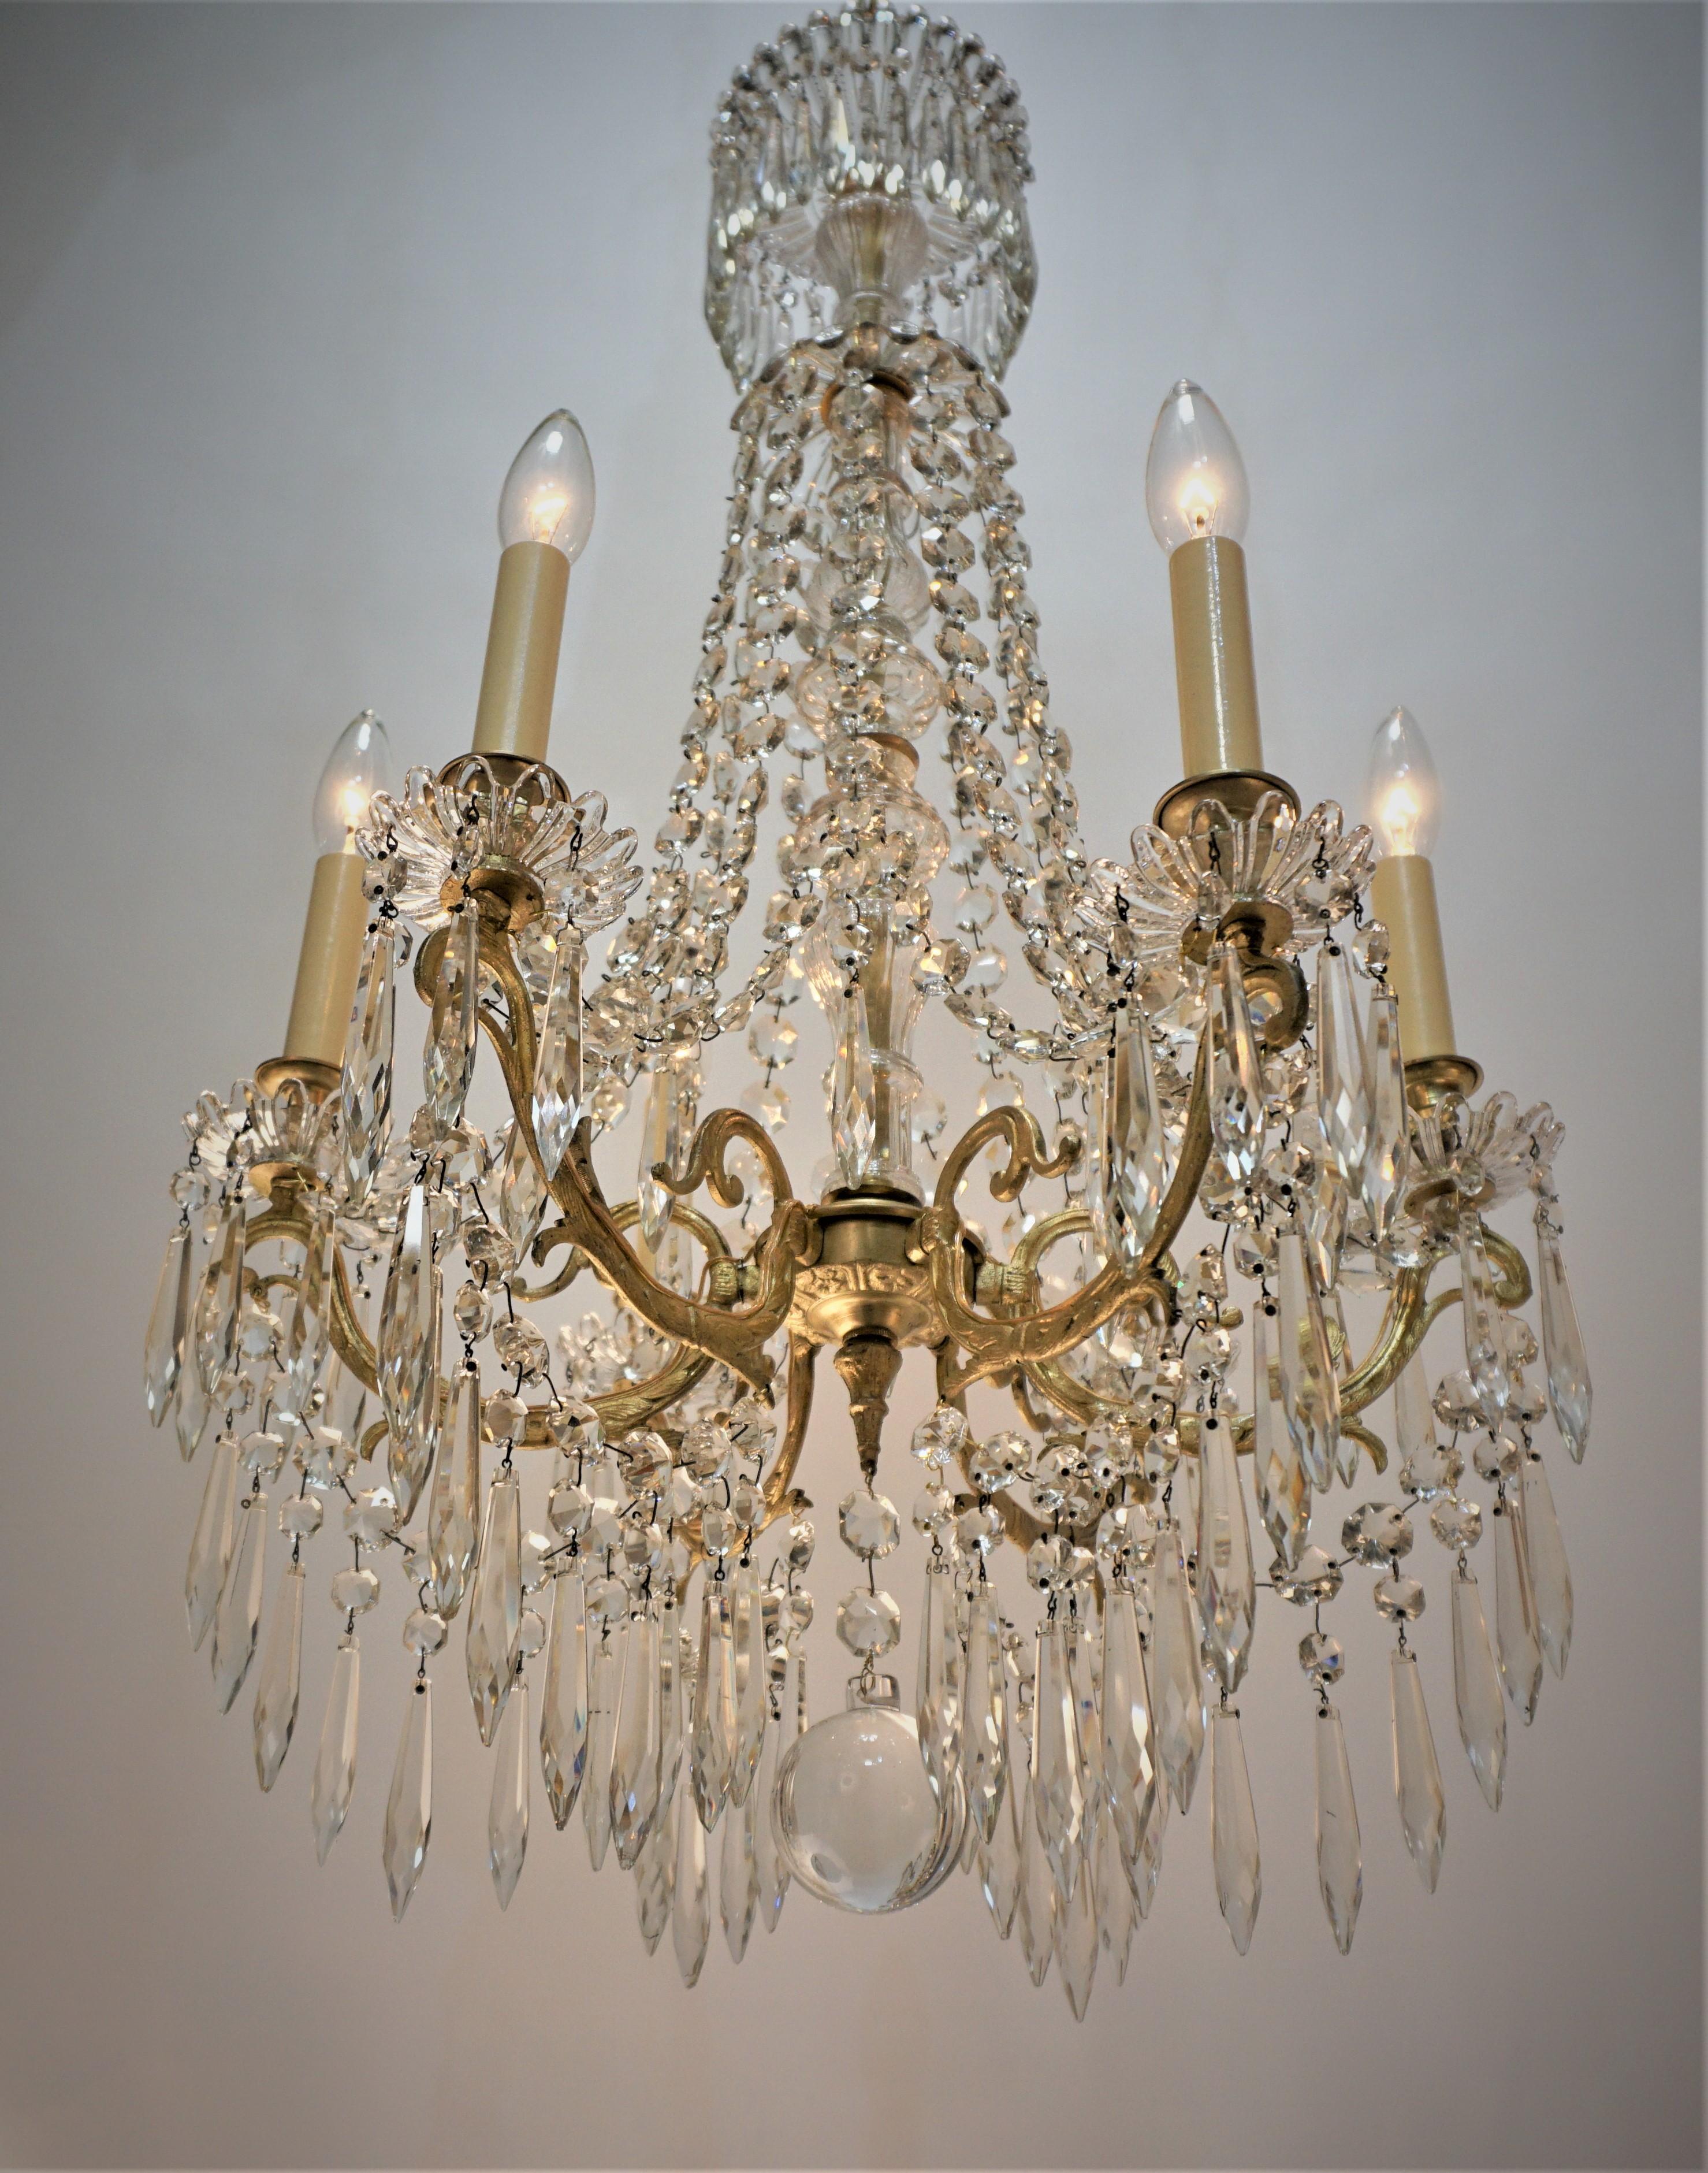 19th Century Baccarat Style Crystal Chandelier In Good Condition For Sale In Fairfax, VA